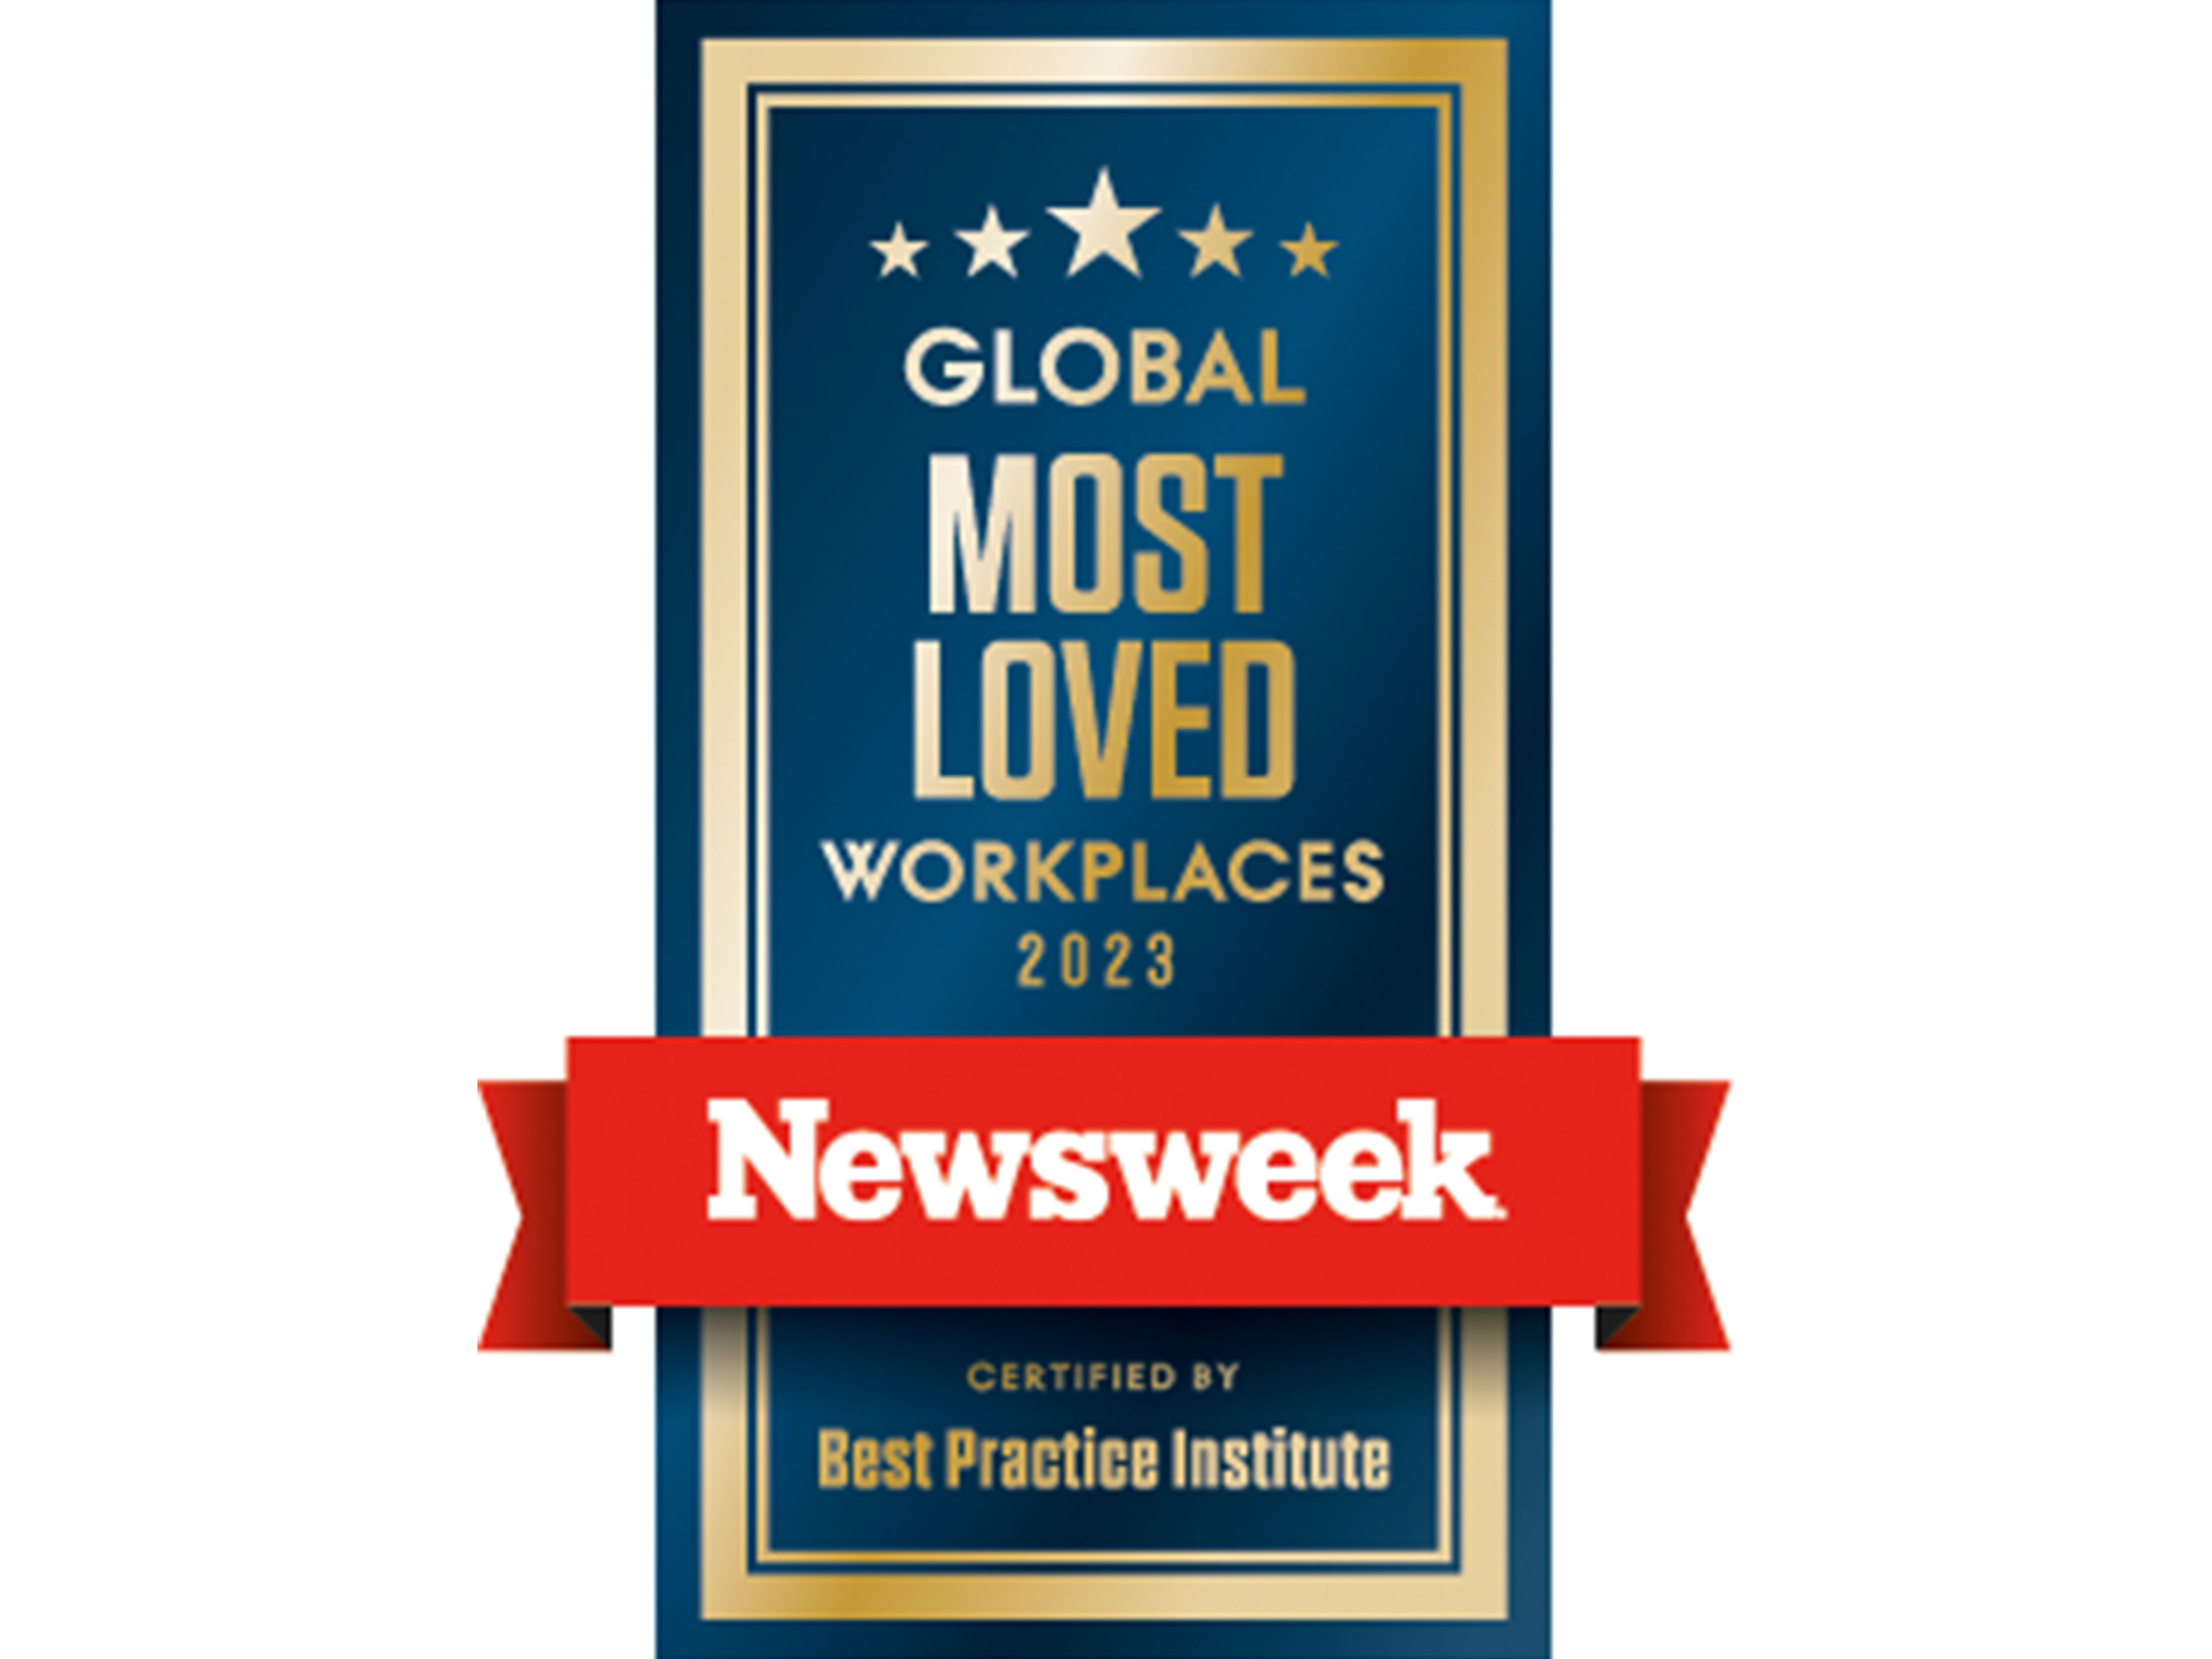 Newsweek Global Most Loved Workplaces 2023 image